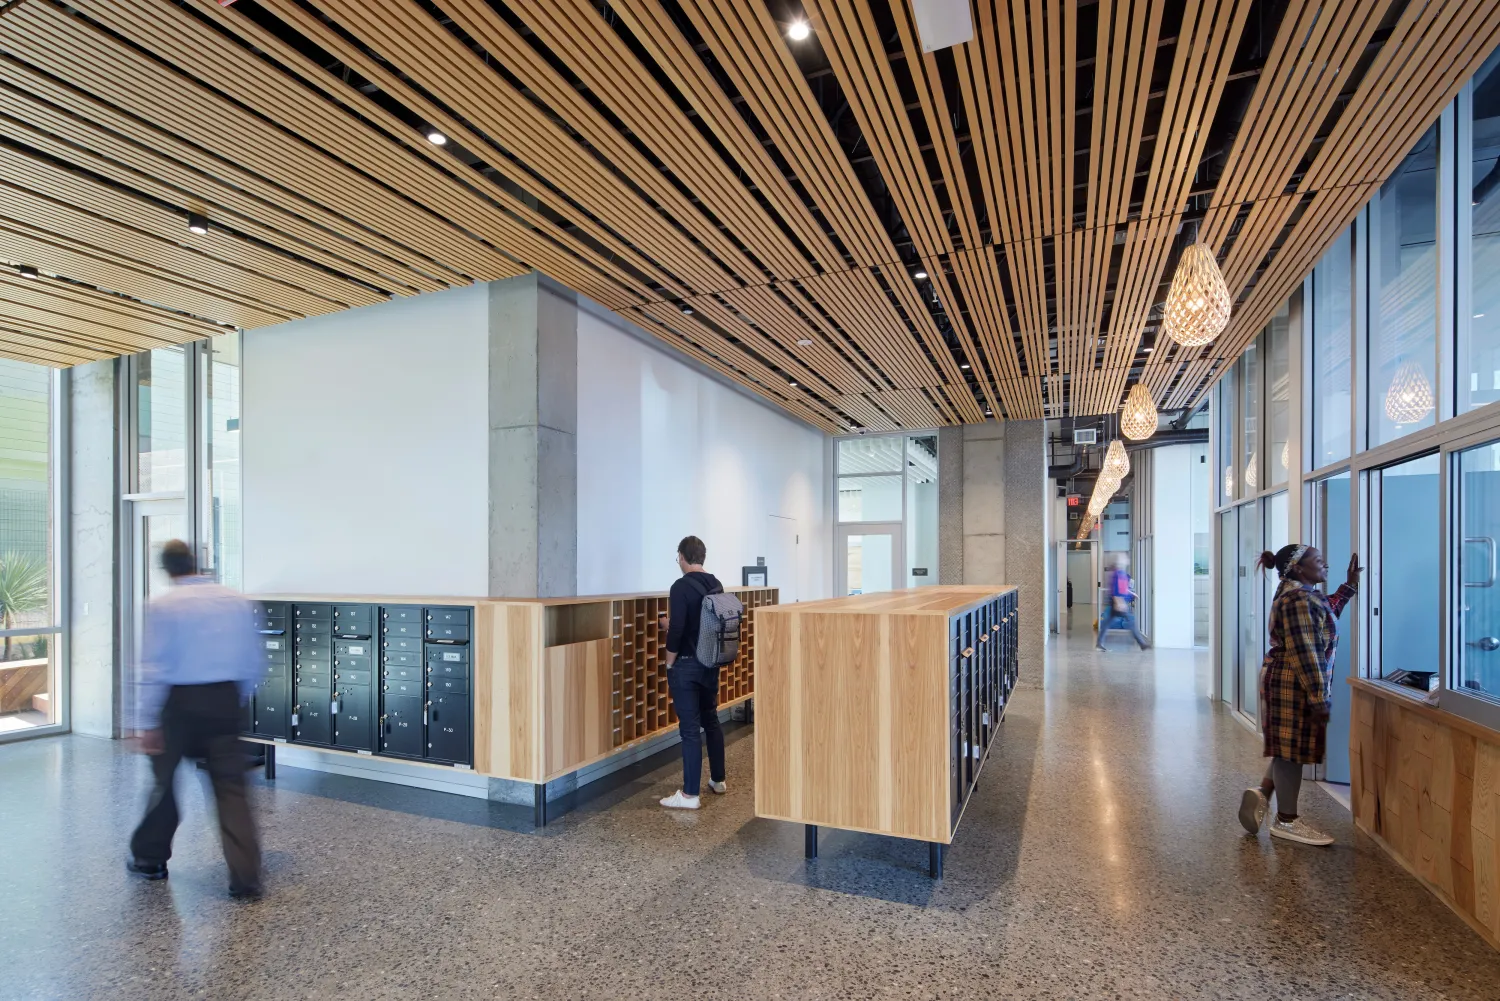 View of lobby with custom wood mailbox enclosures and patterned wood ceiling at Tahanan Supportive Housing in San Francisco.